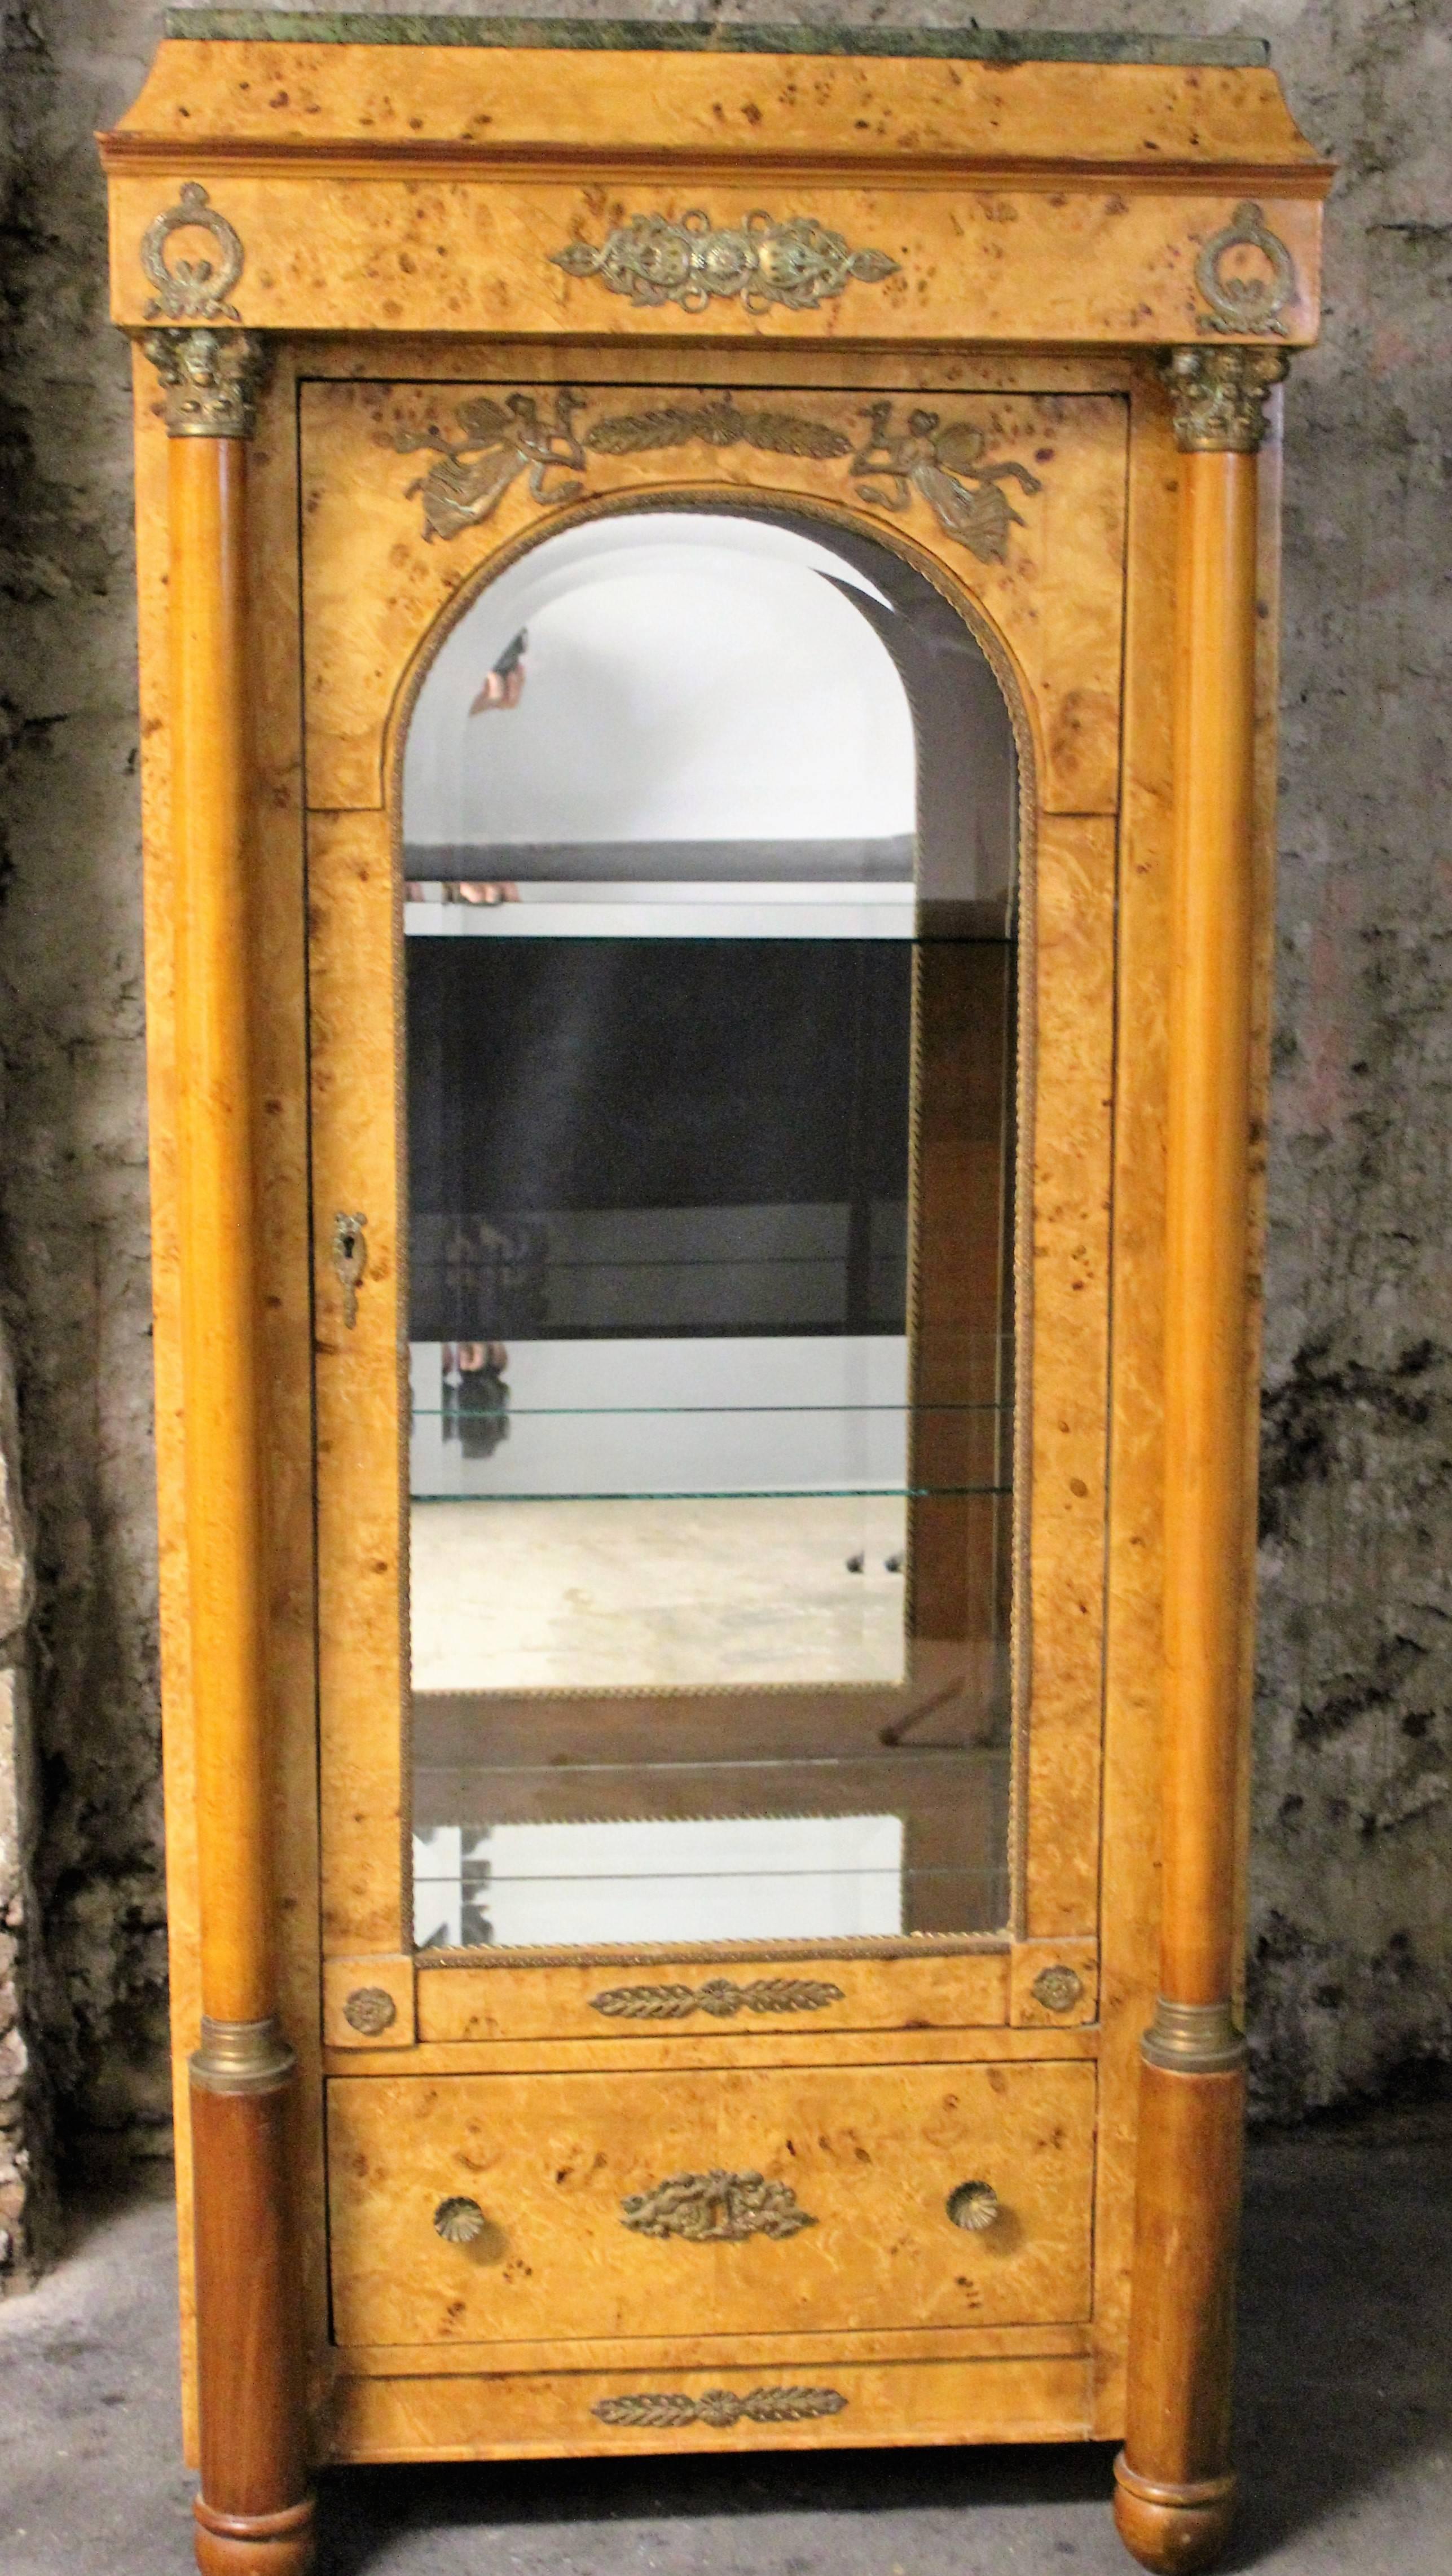 This is a stunning French Empire style burl wood vitrine with beautiful ormolu mounts, beveled glass and a marble top. The glazed domed shaped door is flanked with an imposing pair of columns that are capped with exquisite ormolu mounts. The